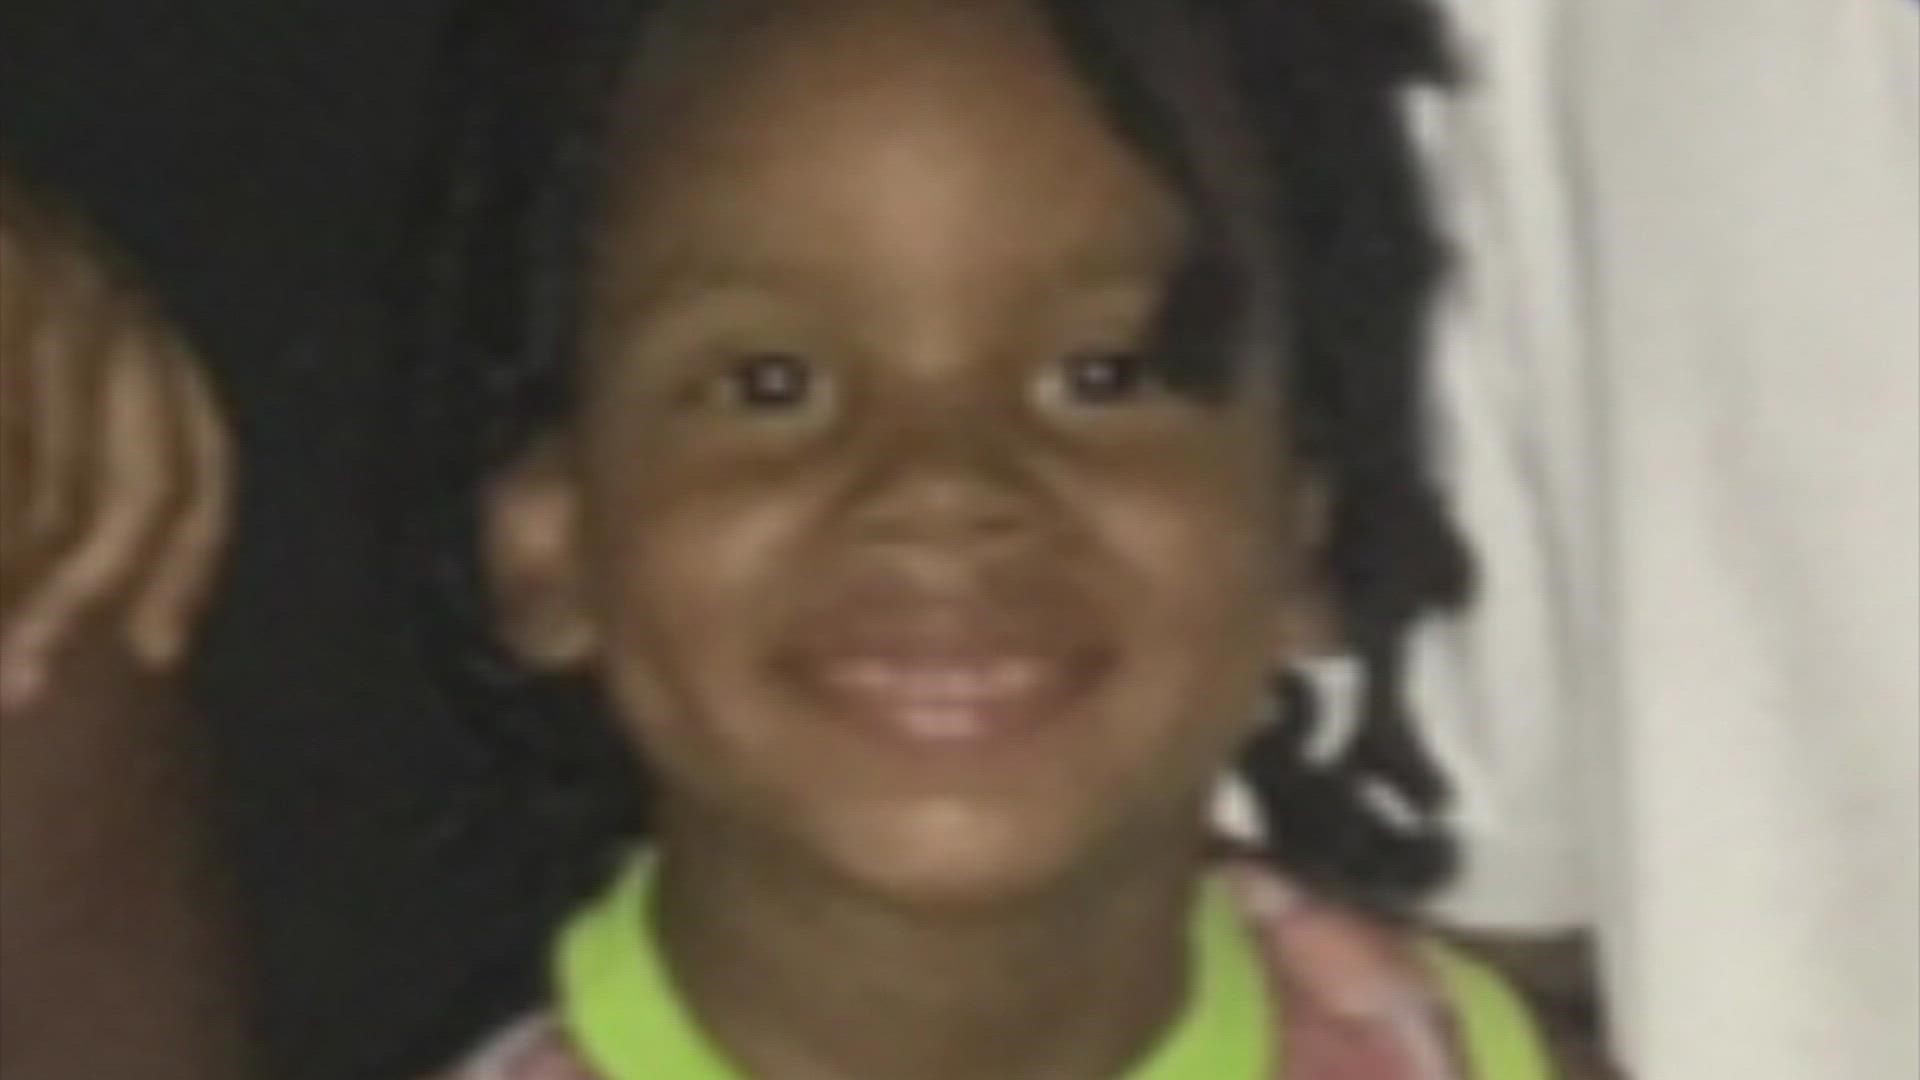 A new report released this week by Child Protective Services details years of investigations leading up to the death of 8-year-old Kendrick Lee.